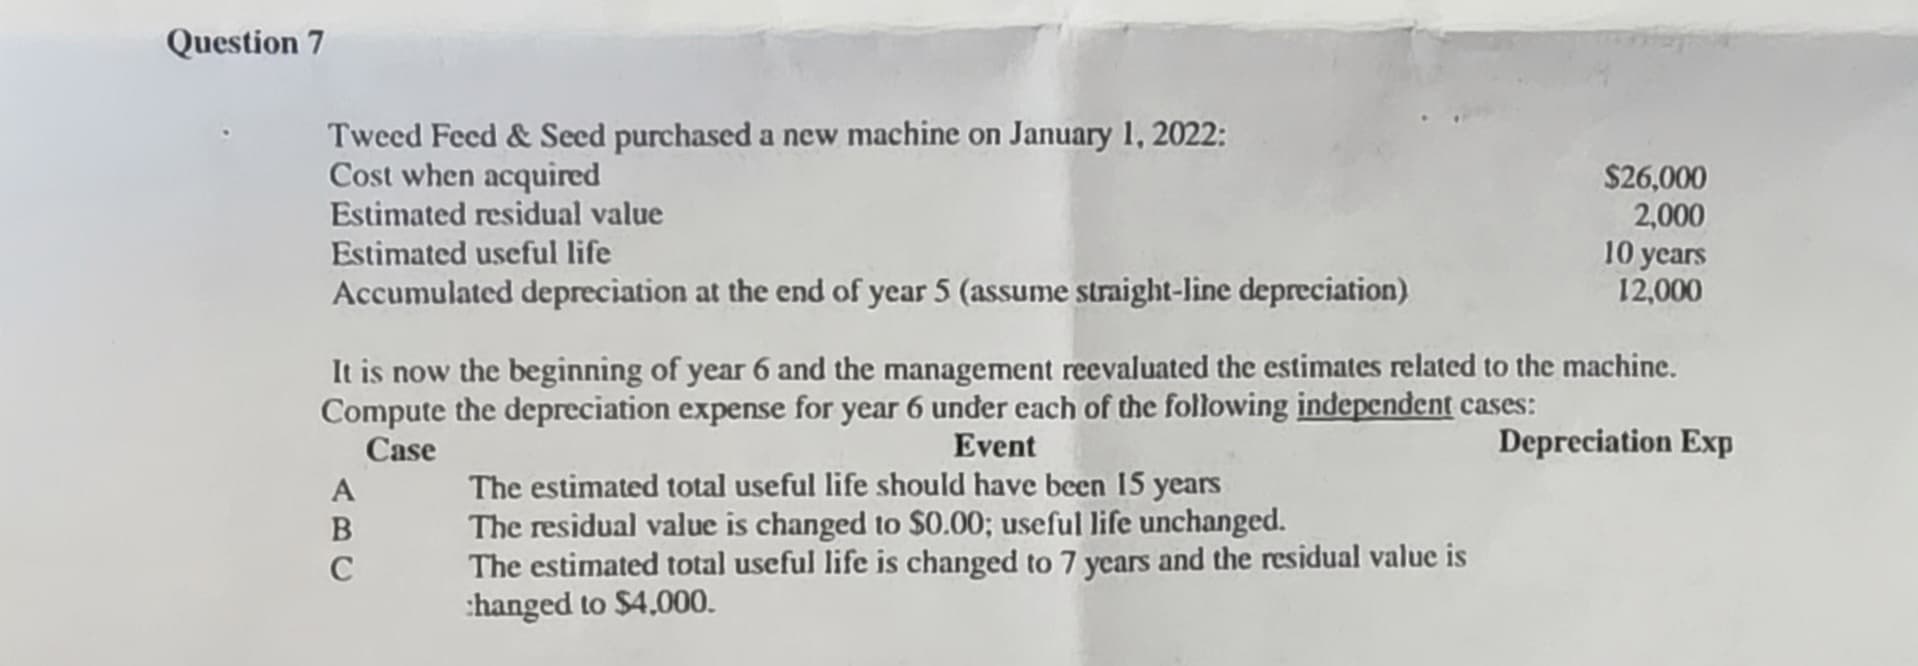 Question 7
Tweed Feed & Seed purchased a new machine on January 1, 2022:
Cost when acquired
Estimated residual value
Estimated useful life
Accumulated depreciation at the end of year 5 (assume straight-line depreciation)
It is now the beginning of year 6 and the management reevaluated the estimates related to the machine.
Compute the depreciation expense for year 6 under each of the following independent cases:
Event
Case
Depreciation Exp
A
B
C
$26,000
2,000
10 years
12,000
The estimated total useful life should have been 15 years
The residual value is changed to $0.00; useful life unchanged.
The estimated total useful life is changed to 7 years and the residual value is
changed to $4,000.